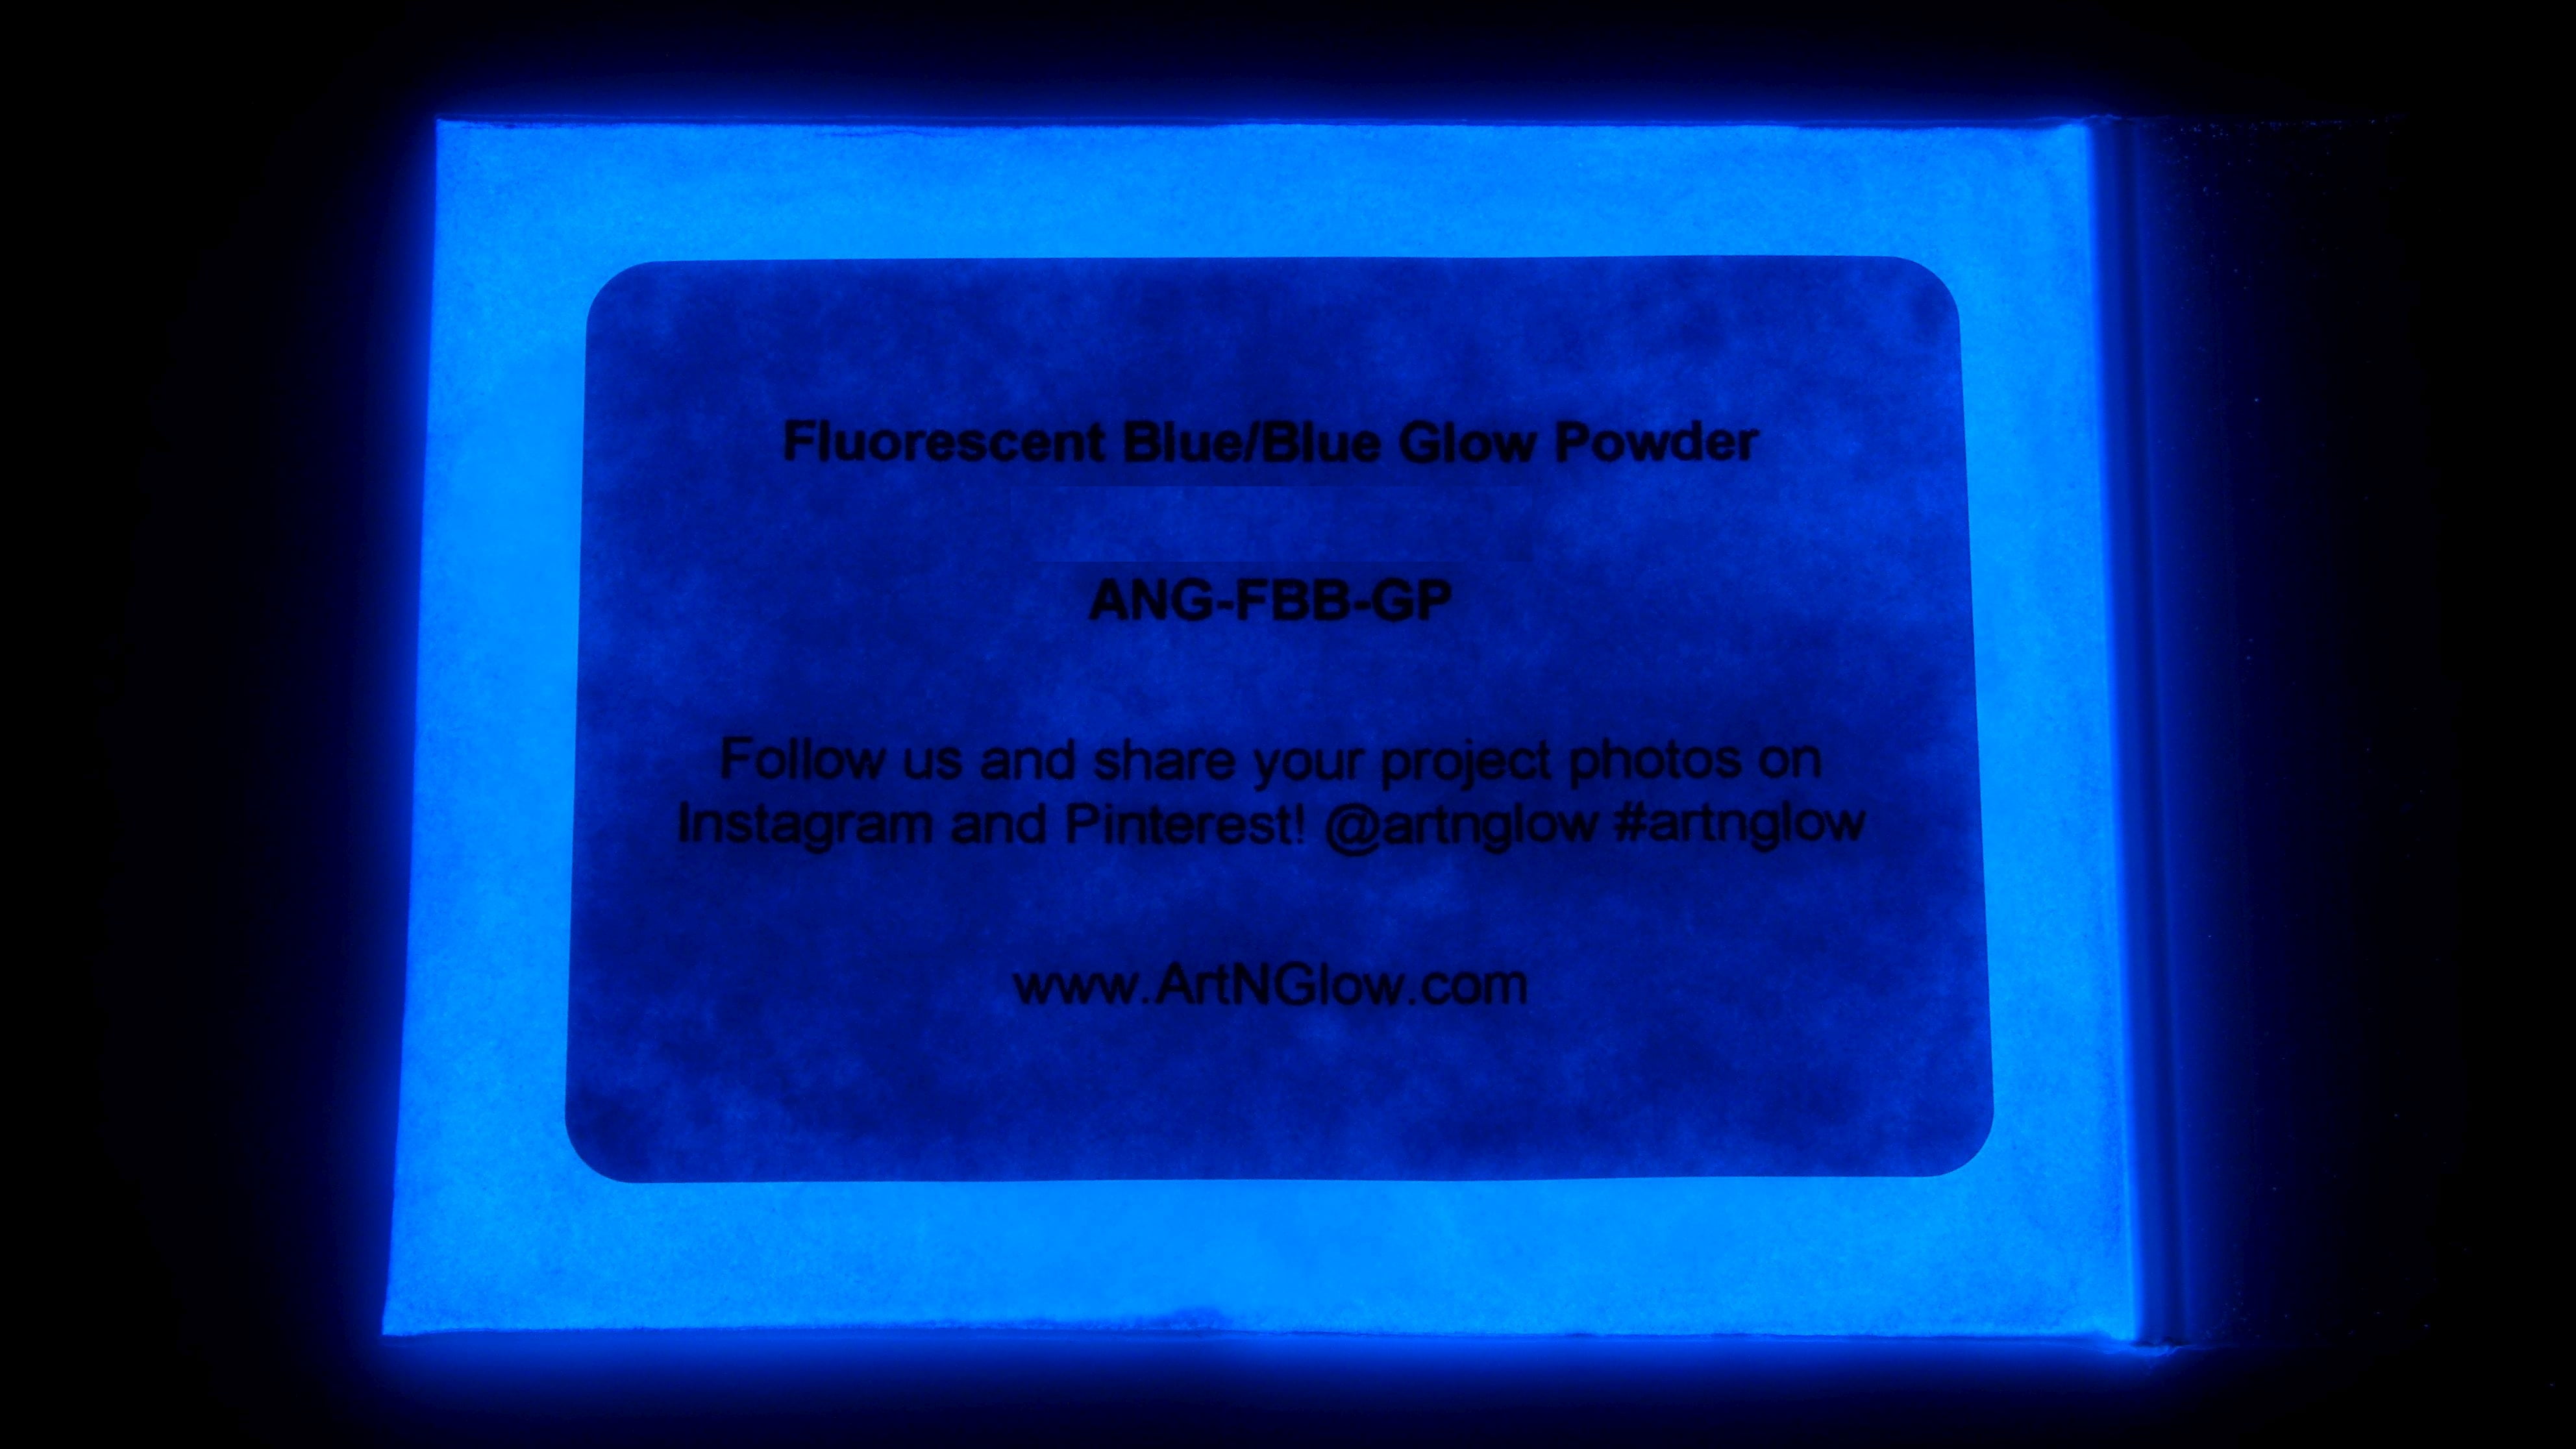 Art 'N Glow 1 Ounce Glow In The Dark Pigment Powder - Variety of Color  Options Available